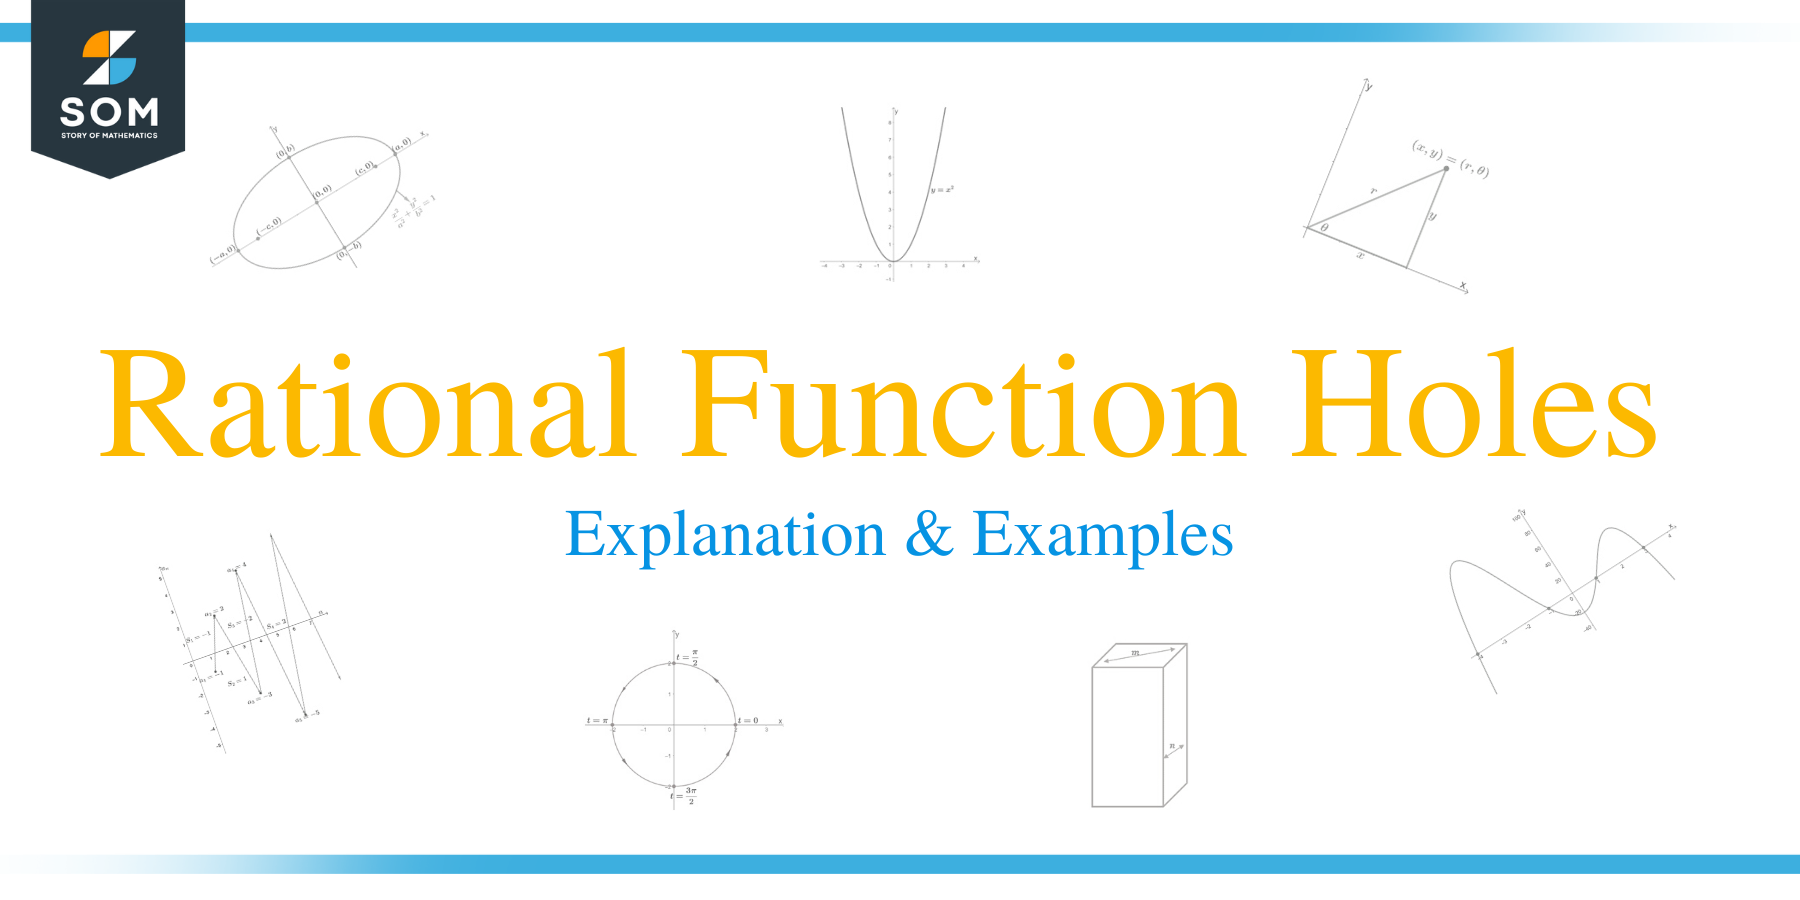 Rational Function Holes